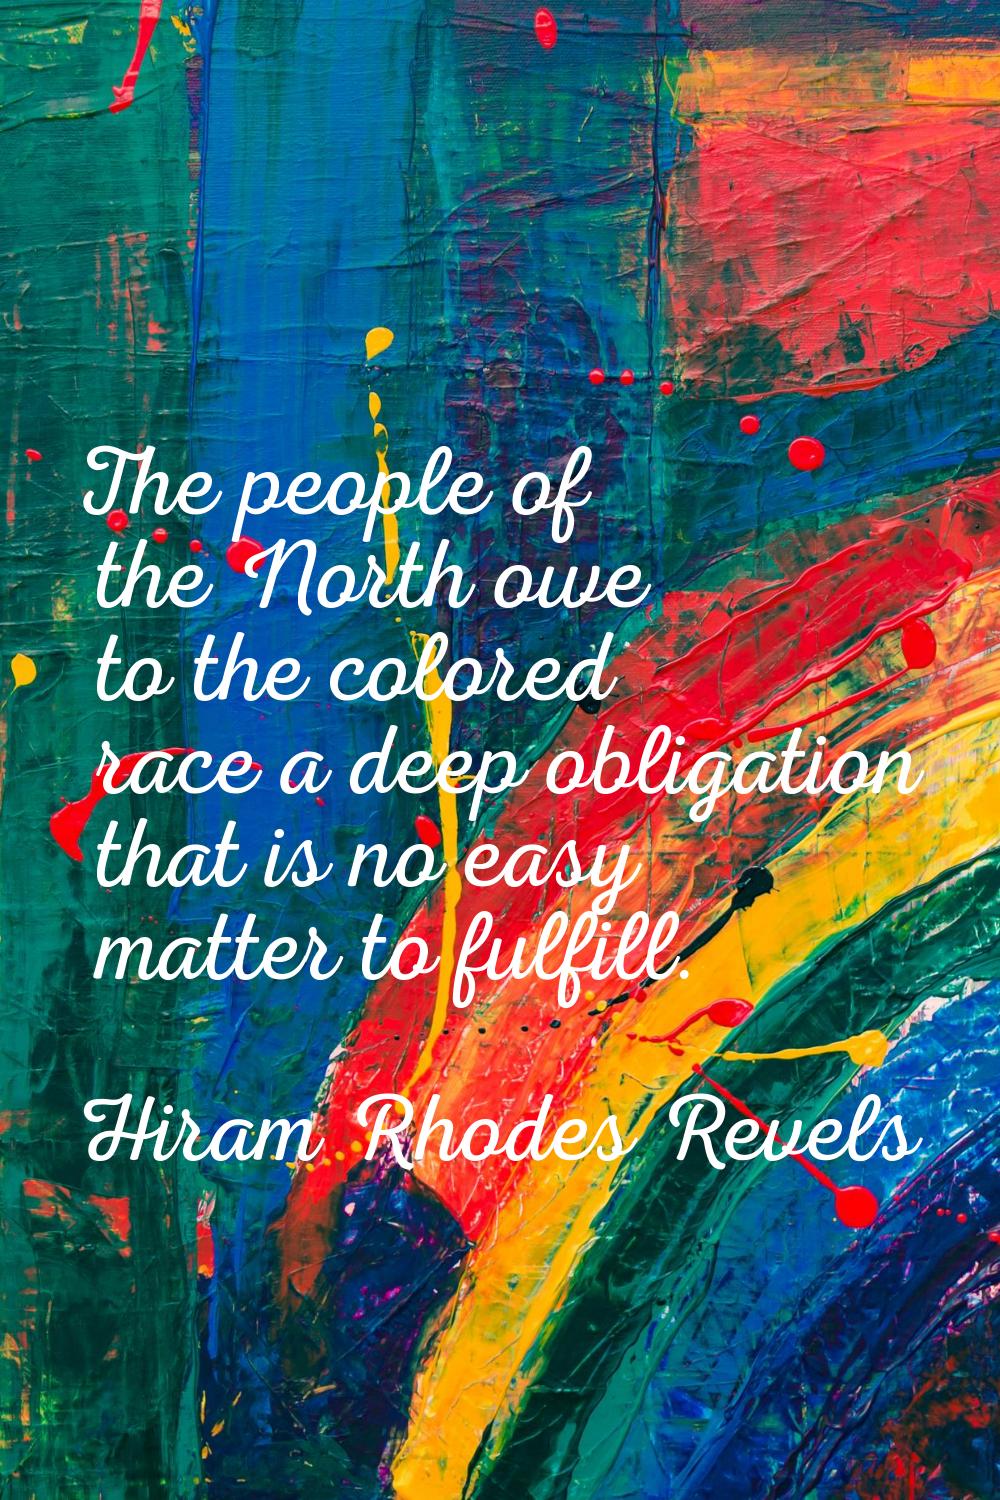 The people of the North owe to the colored race a deep obligation that is no easy matter to fulfill